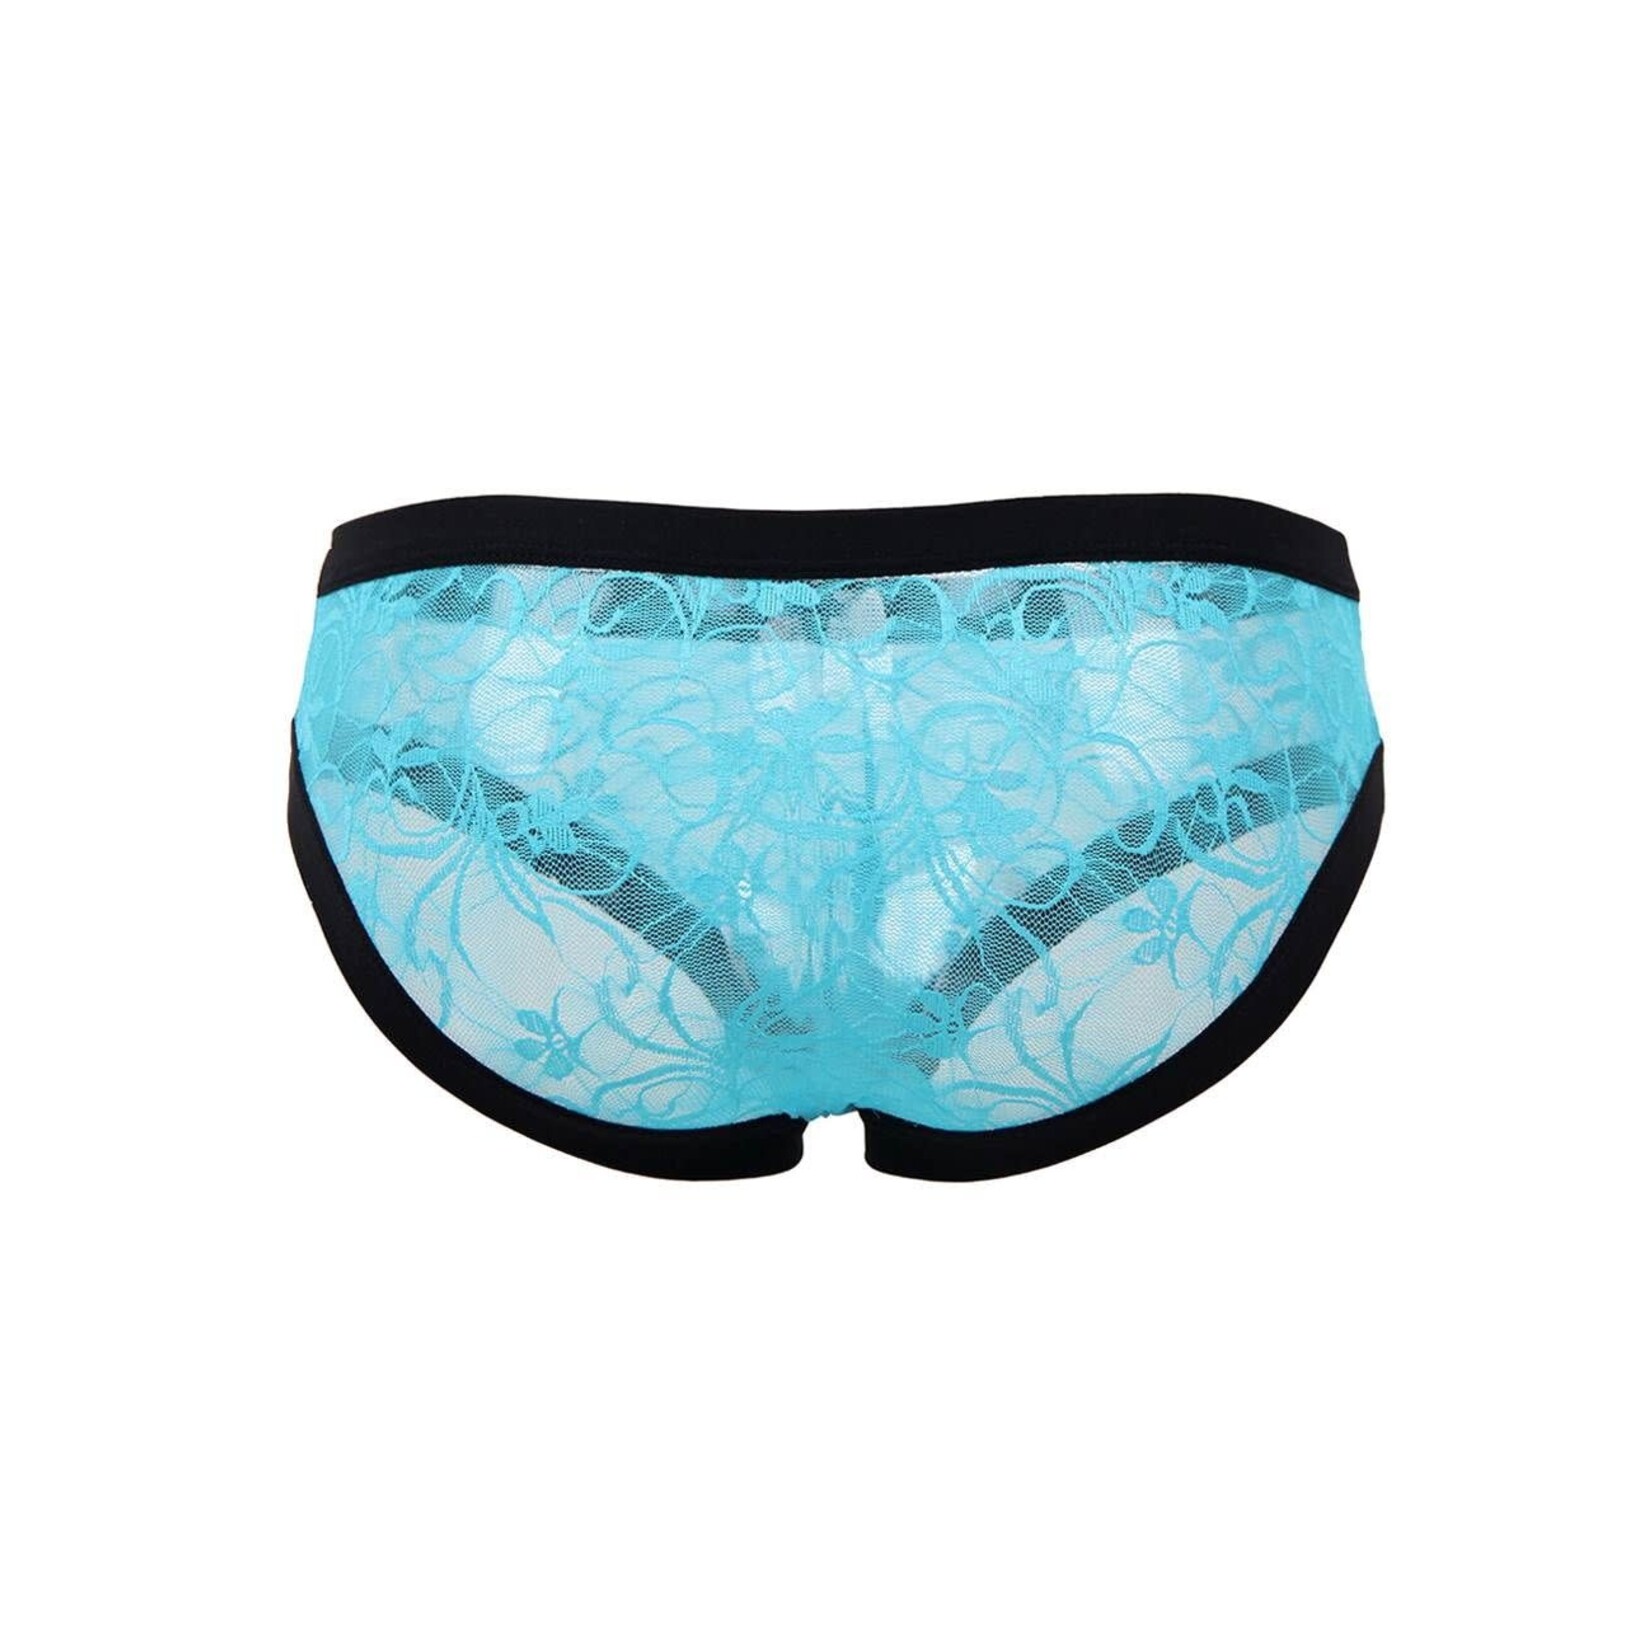 OH YEAH! -  SEXY BLUE LACE PANTY FOR MEN XS